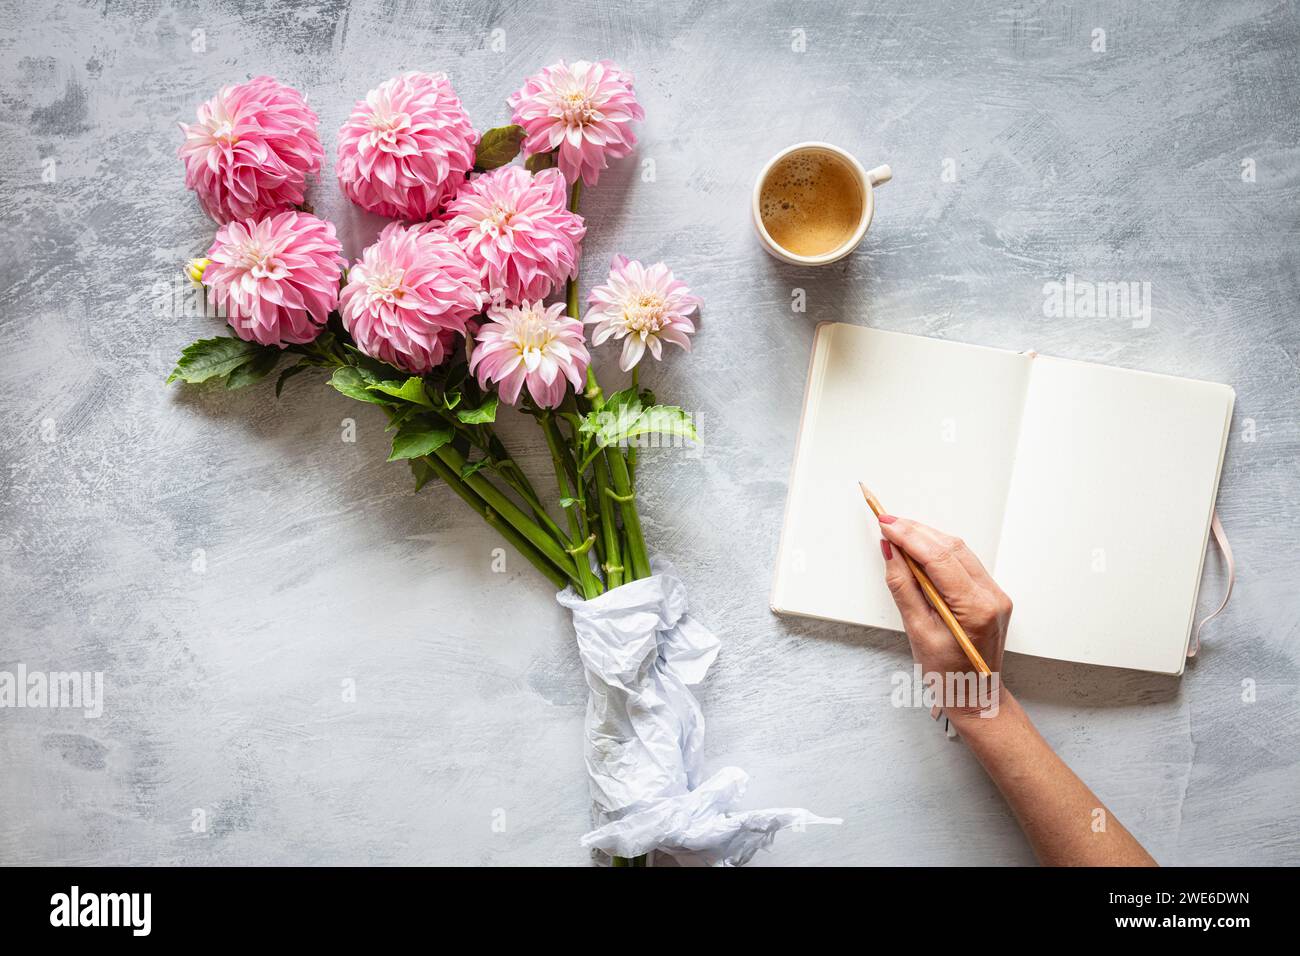 Hand of woman writing in diary in front of bouquet of pink blooming 'Verones DF' dahlias Stock Photo